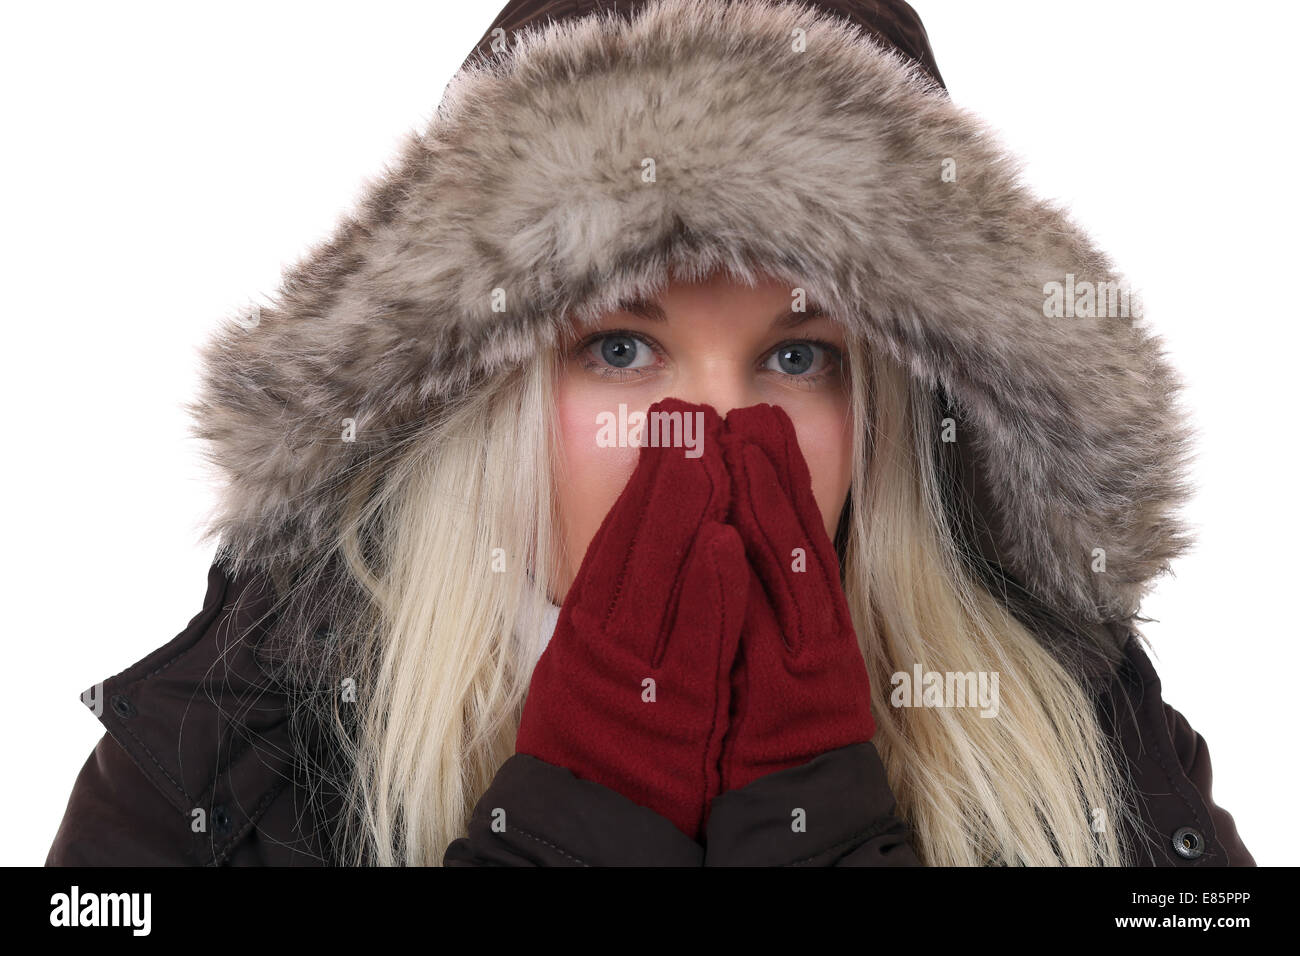 Young woman freezing in the cold in winter with gloves and cap, isolated on a white background Stock Photo